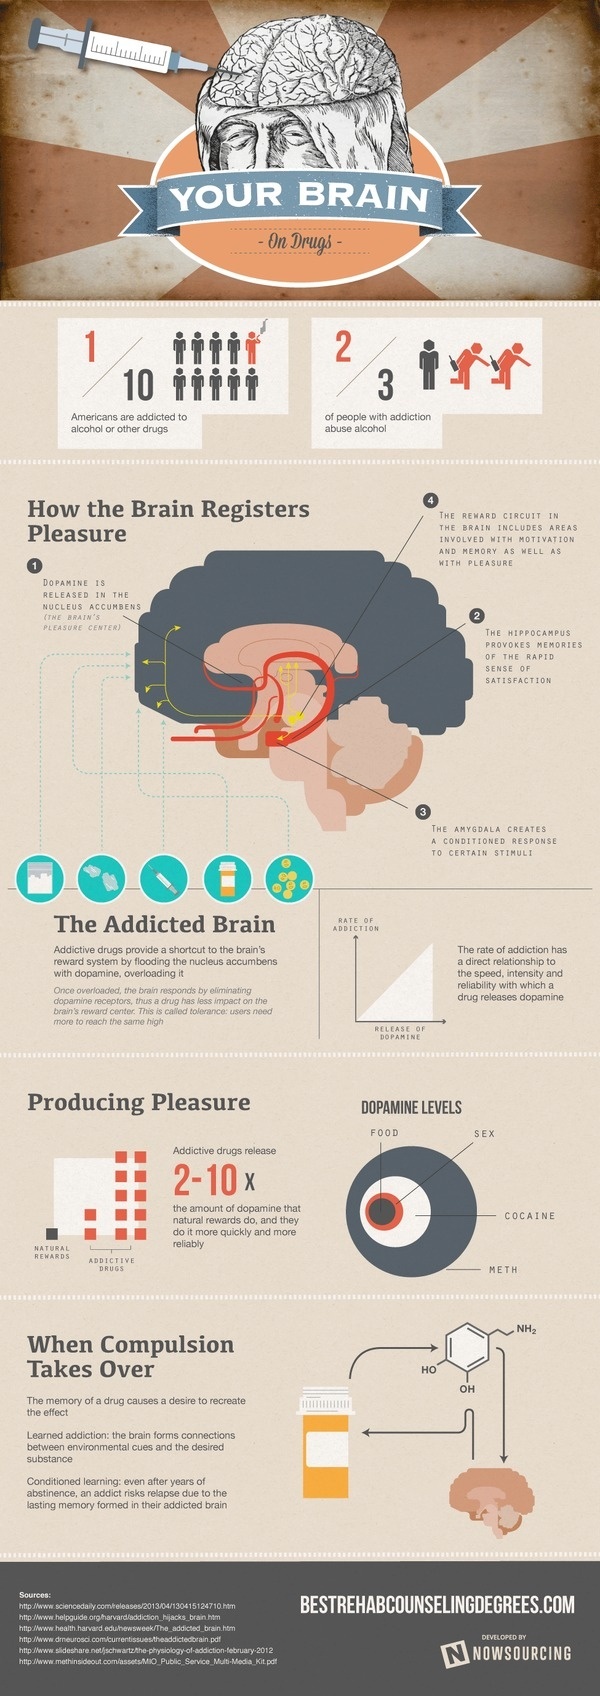 Your Brain on Drugs #infographic